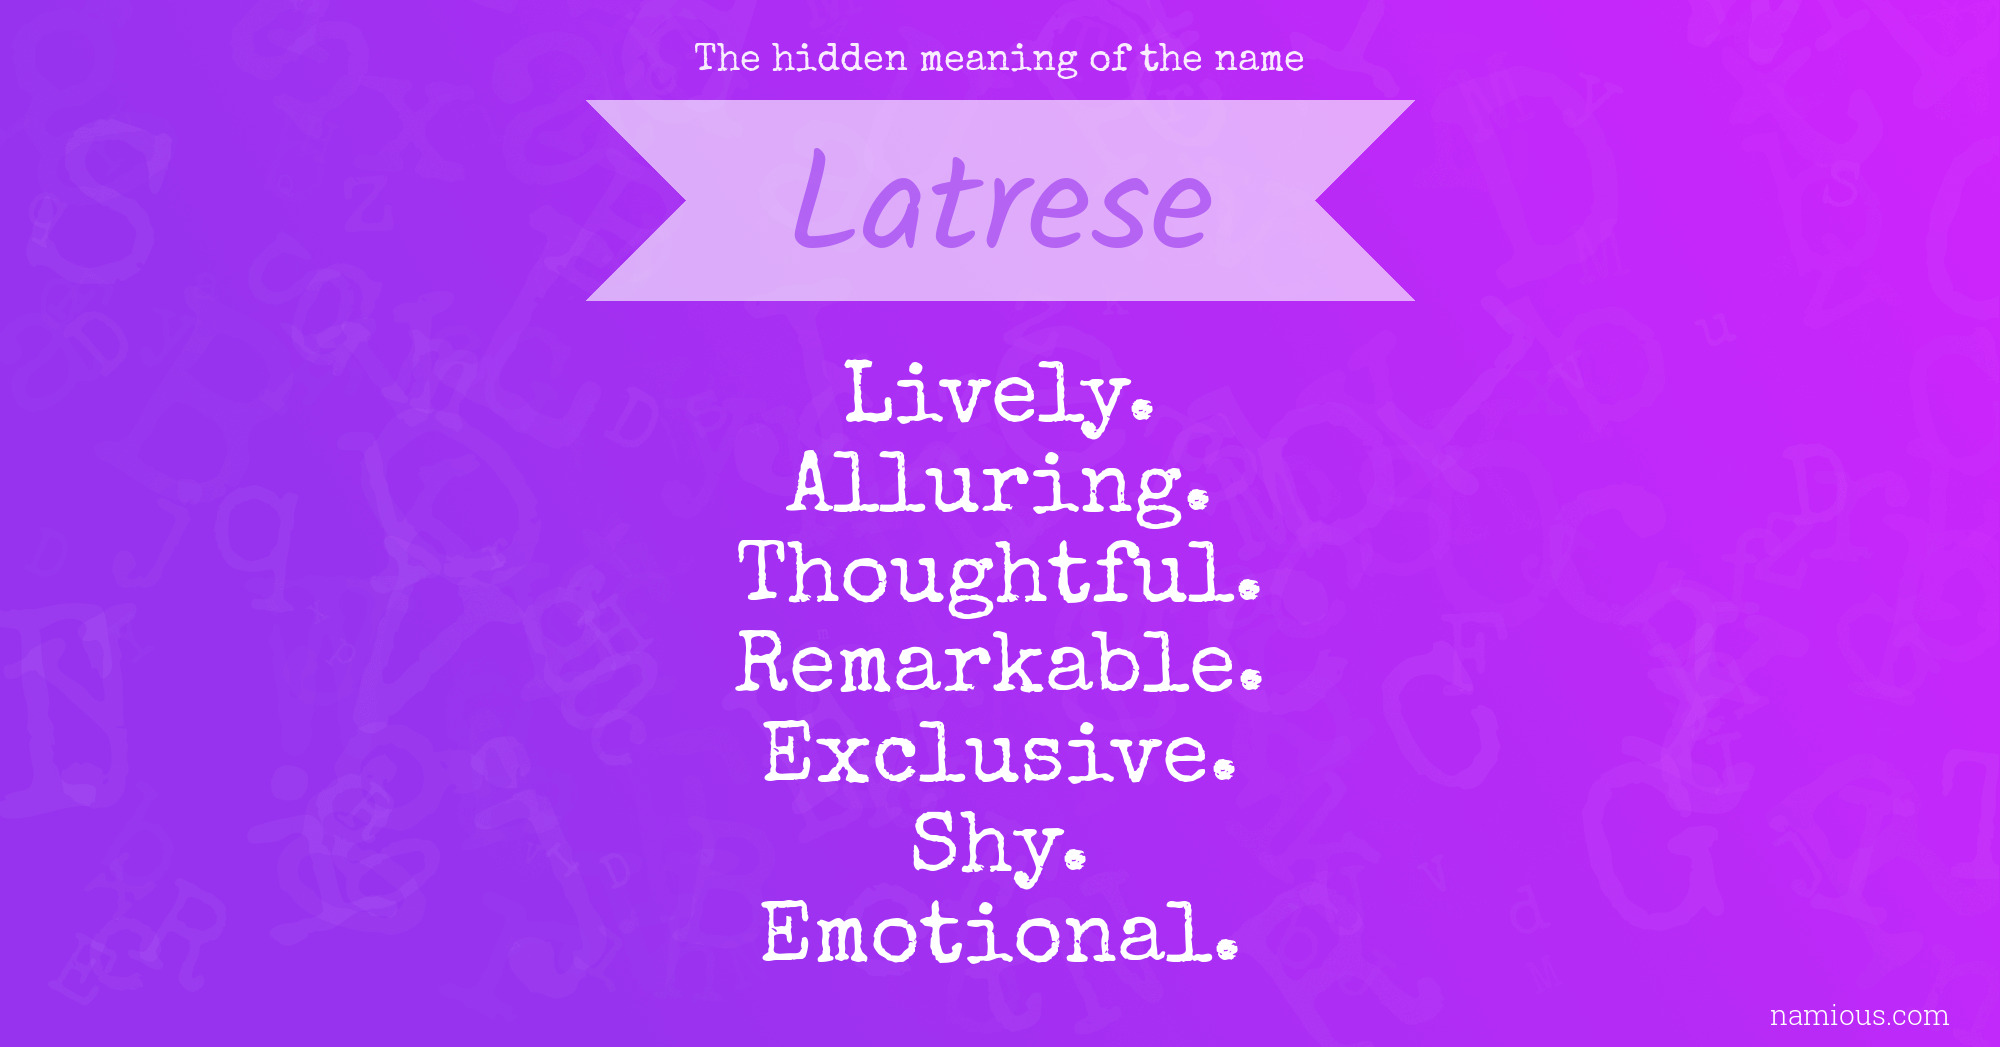 The hidden meaning of the name Latrese